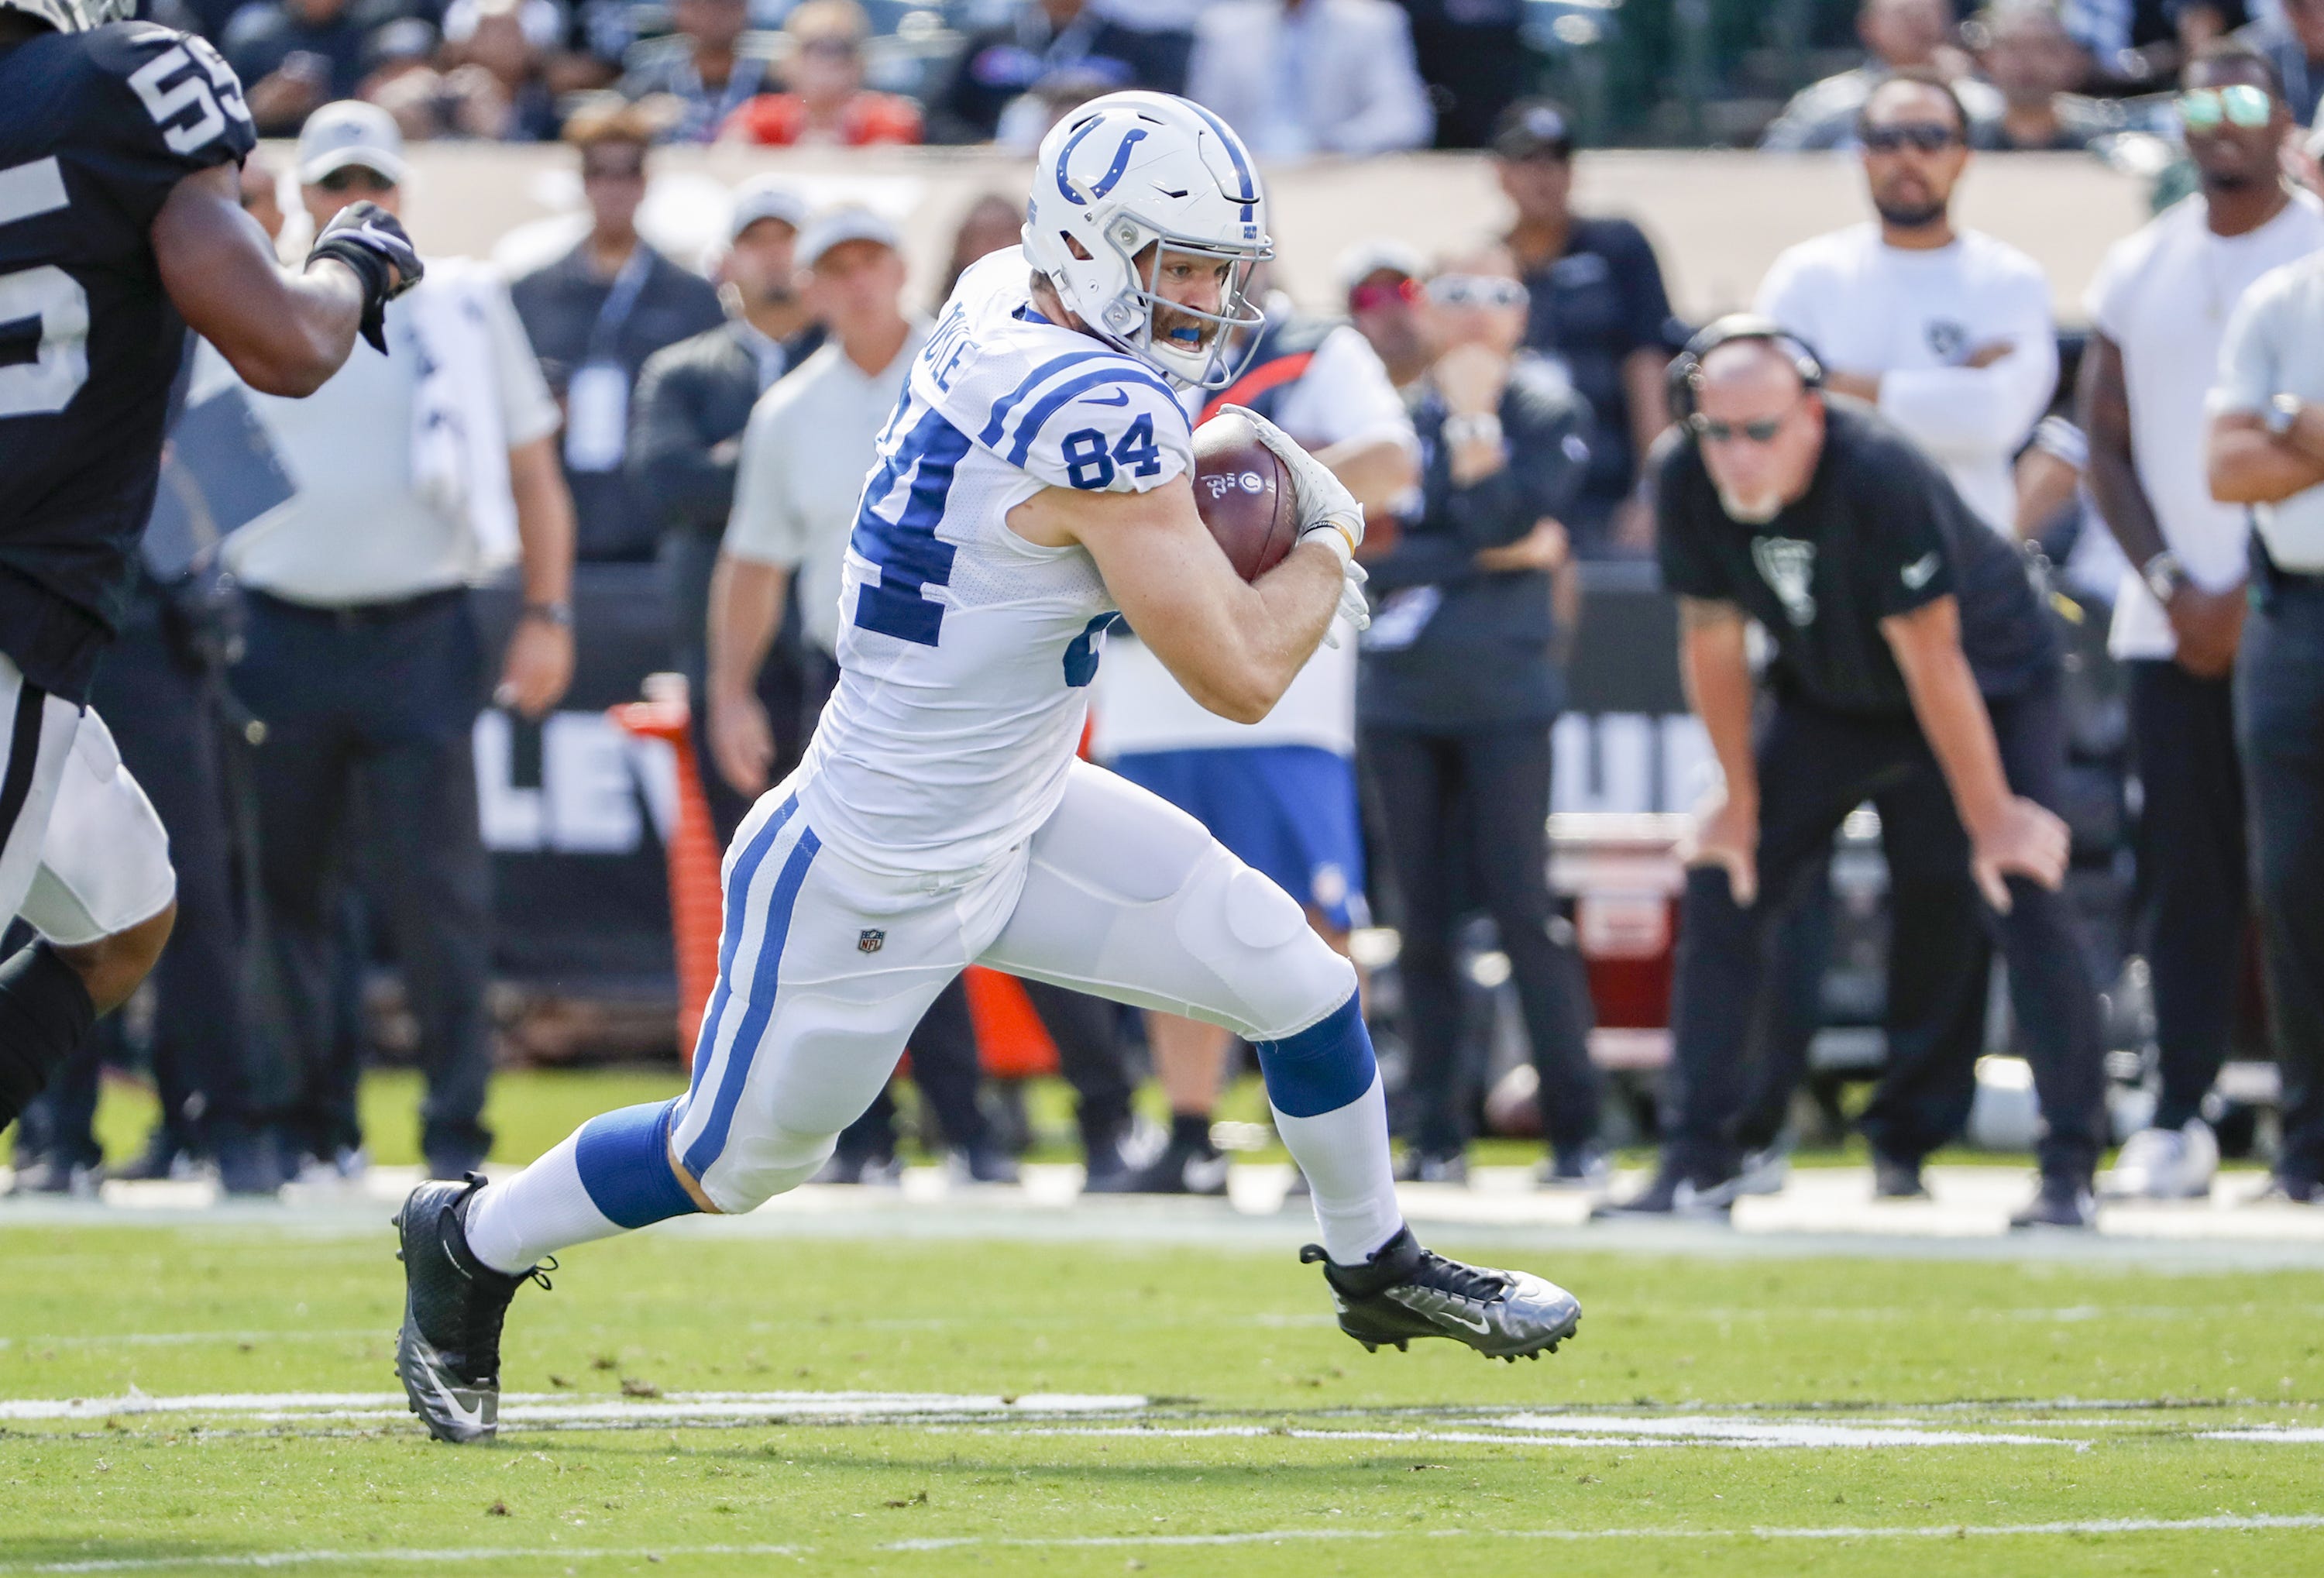 Insider: Colts tight end Jack Doyle saved his best for critical moments against Raiders